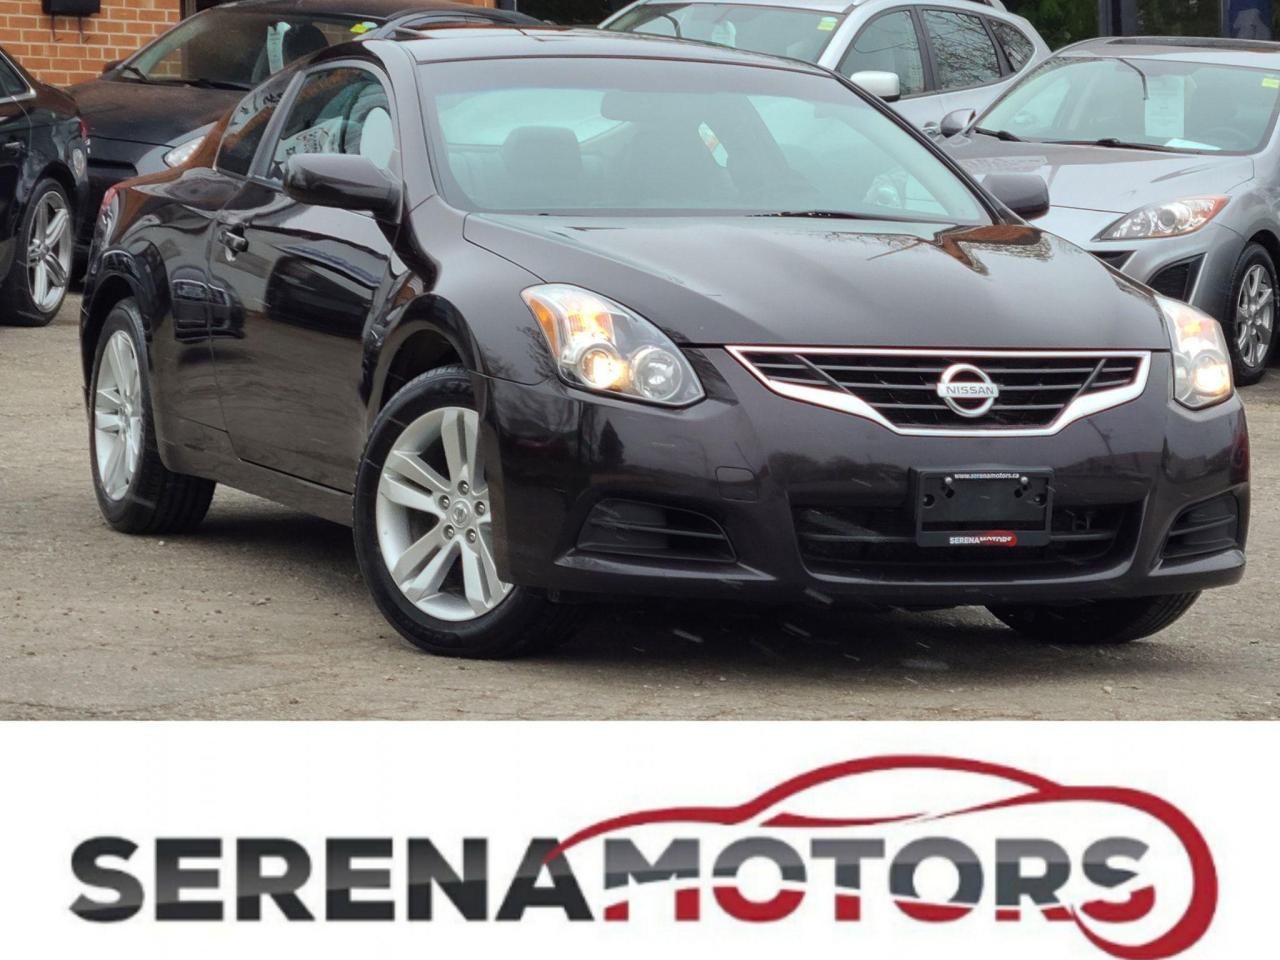 2011 Nissan Altima COUPE | 2.5 S | AUTO | FULLY LOADED | NO ACCIDENTS - Photo #1